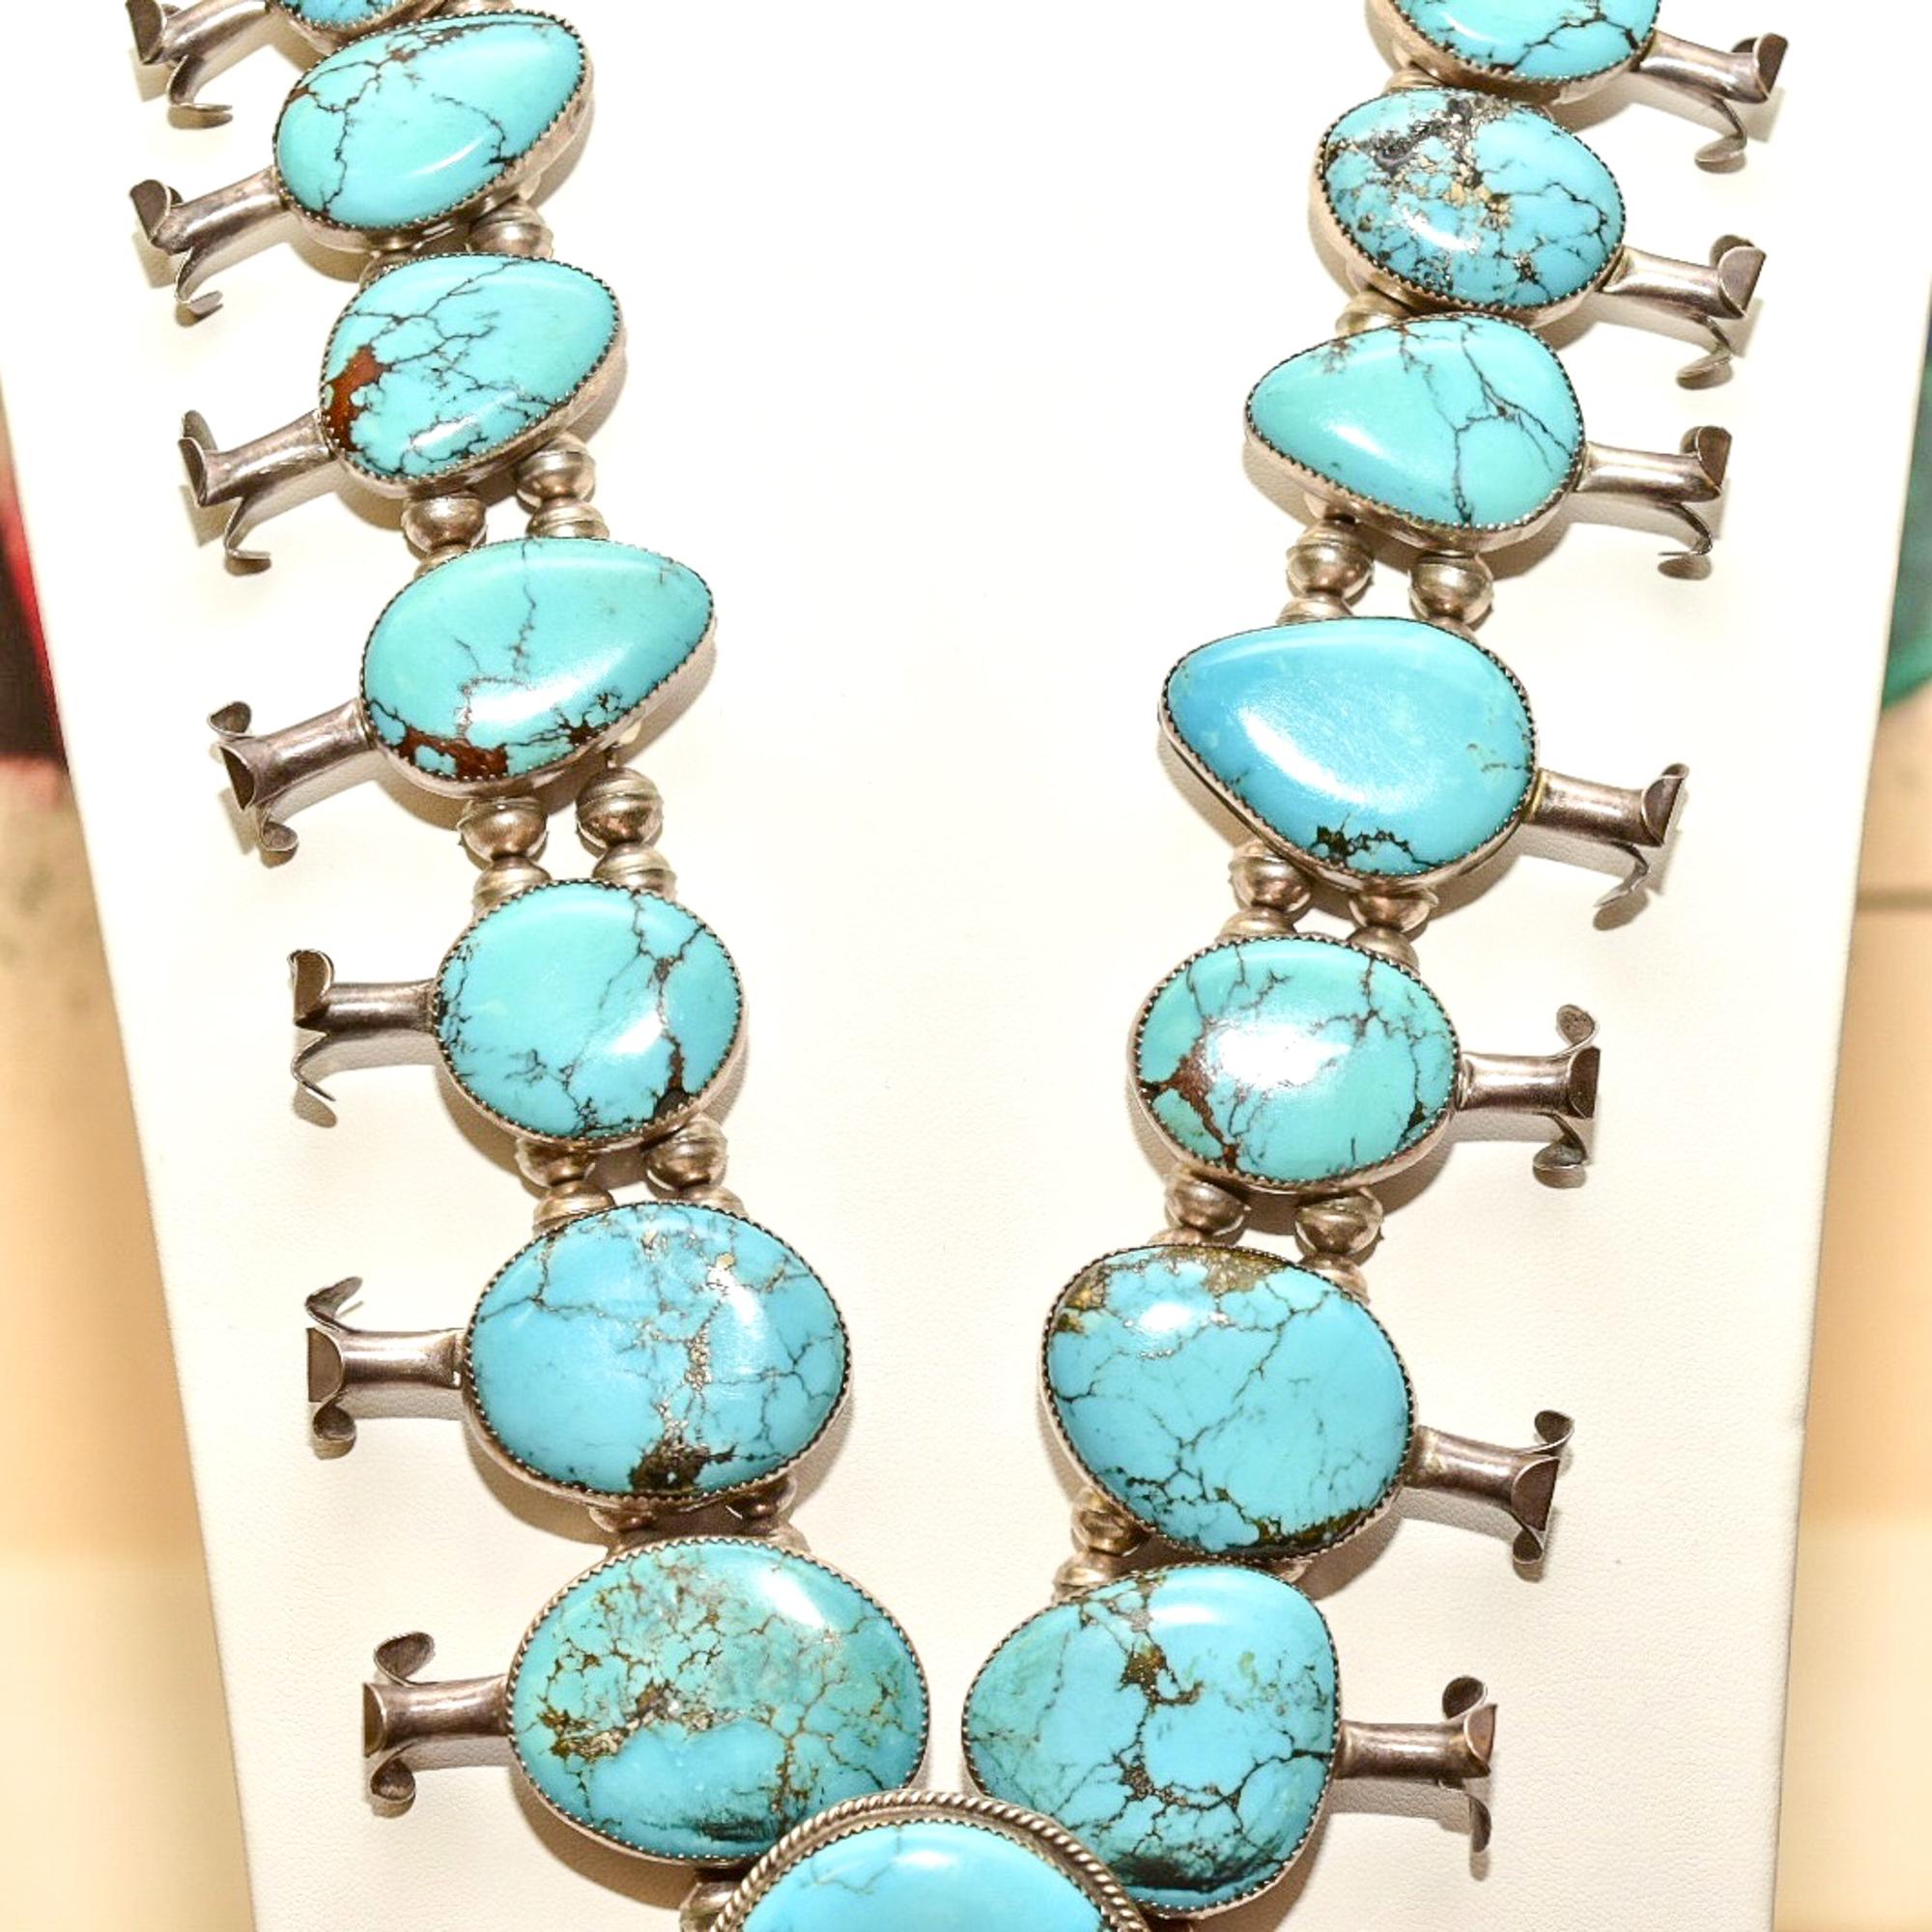 HUGE Native American Turquoise Squash Blossom Necklace In Good Condition For Sale In Philadelphia, PA